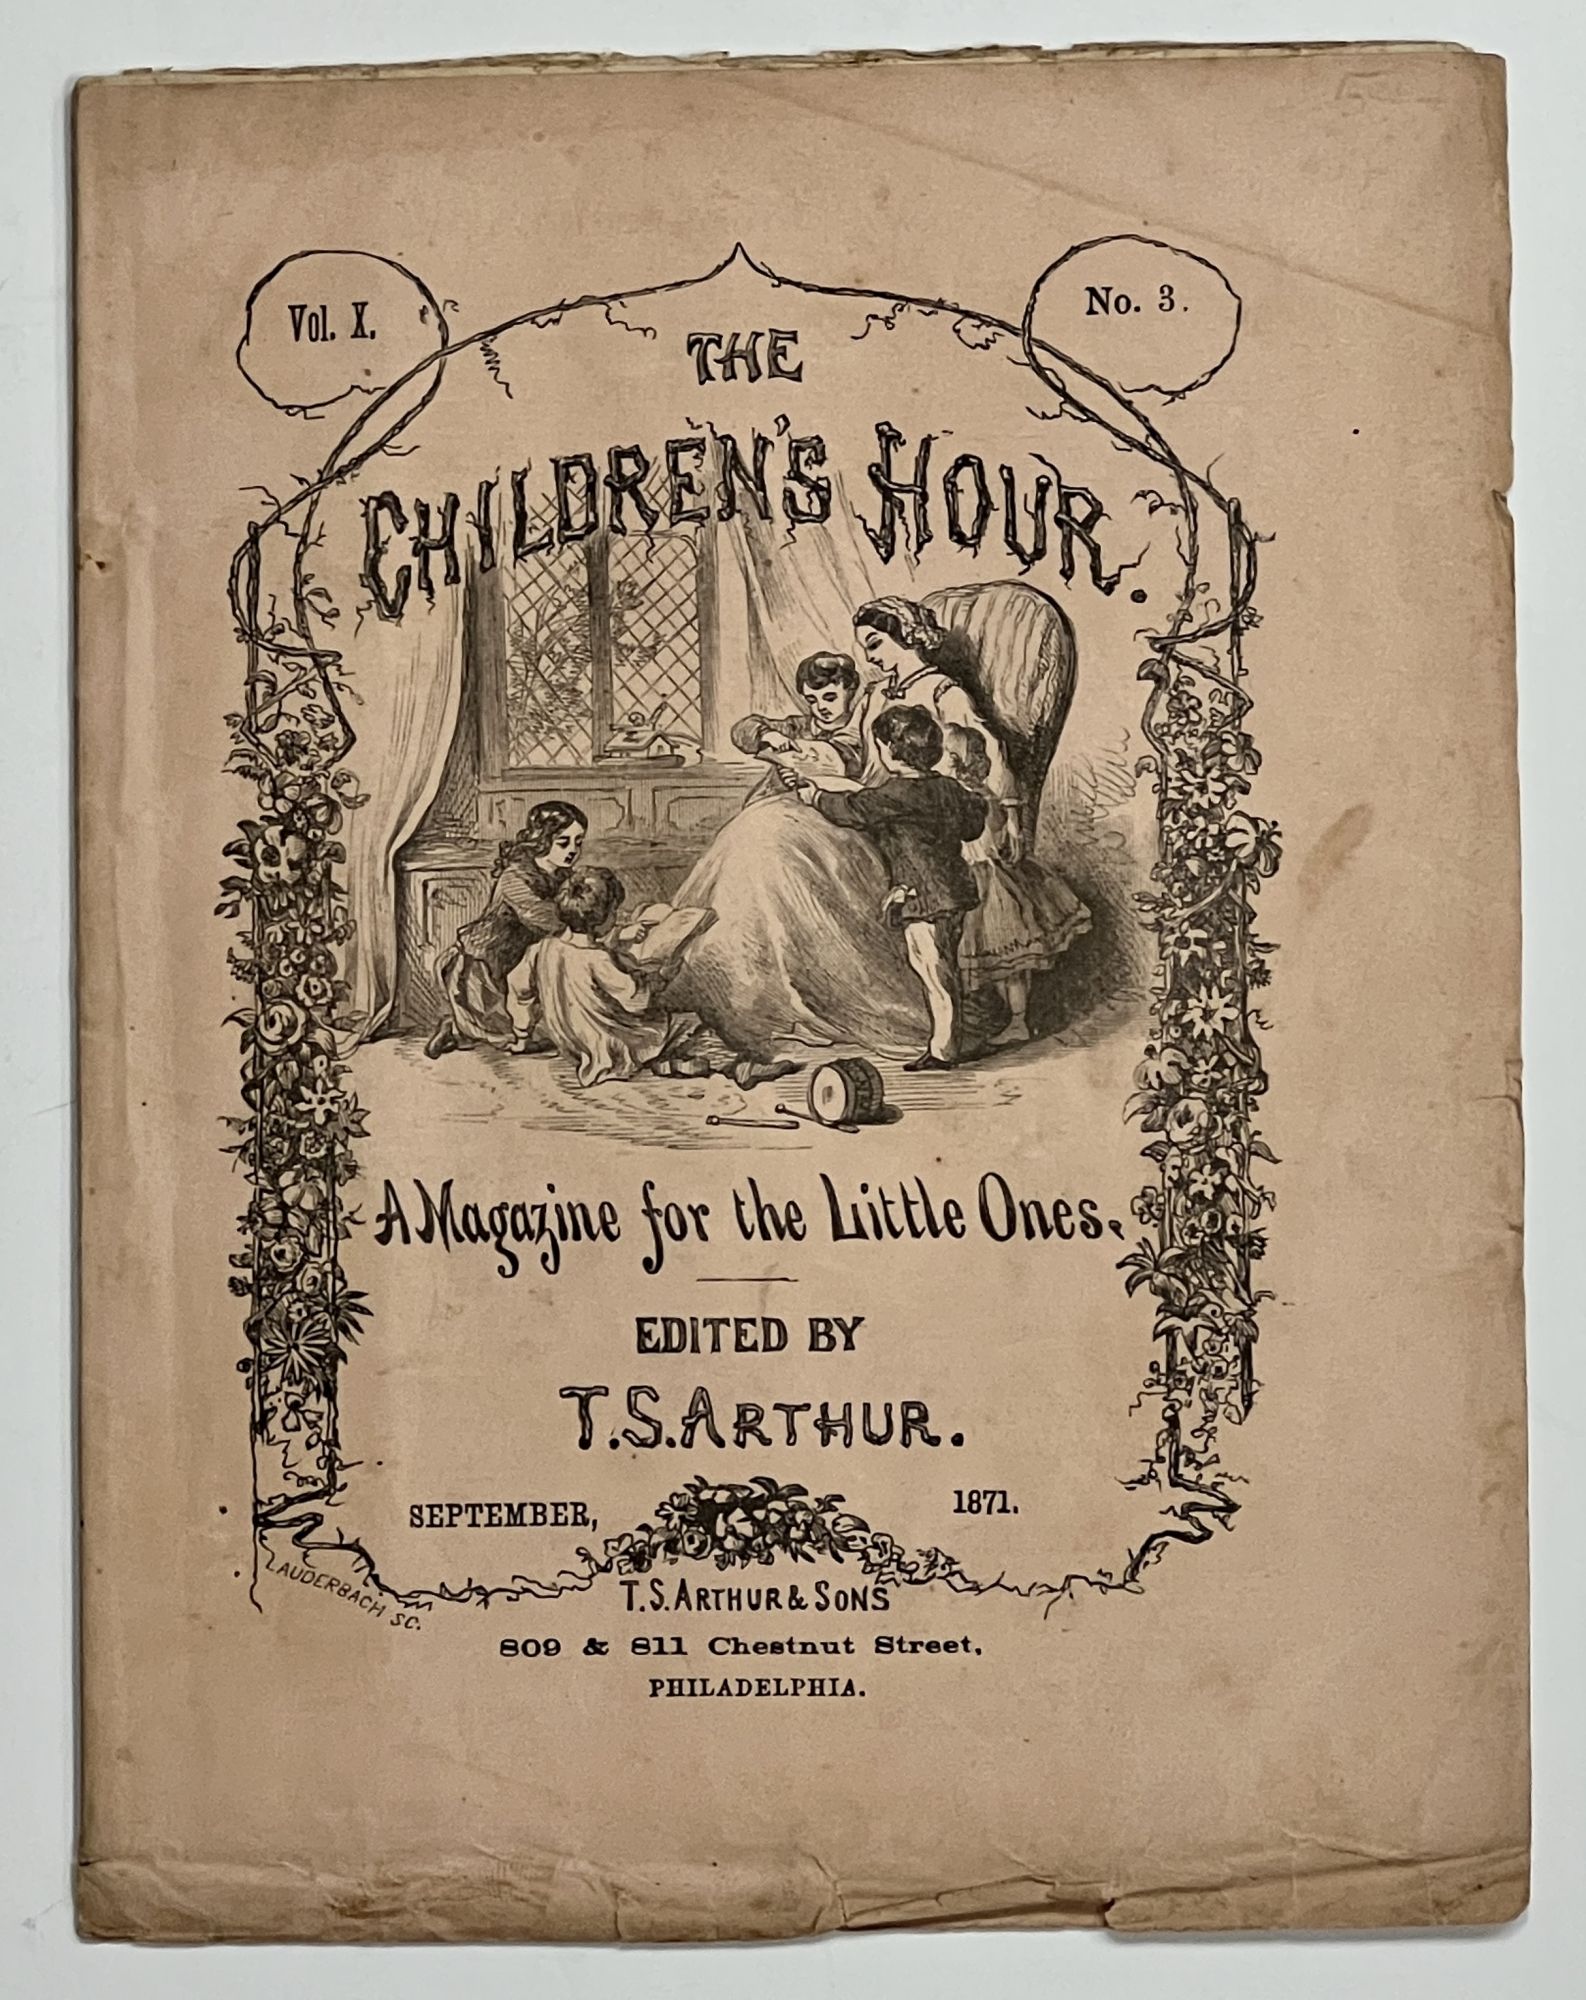 Arthur, T[imothy]. S[hay] [1809 - 1885]. - Editor - The CHILDREN'S HOUR. A Magazine for the Little Ones. September 1871. Vol. X. No. 3